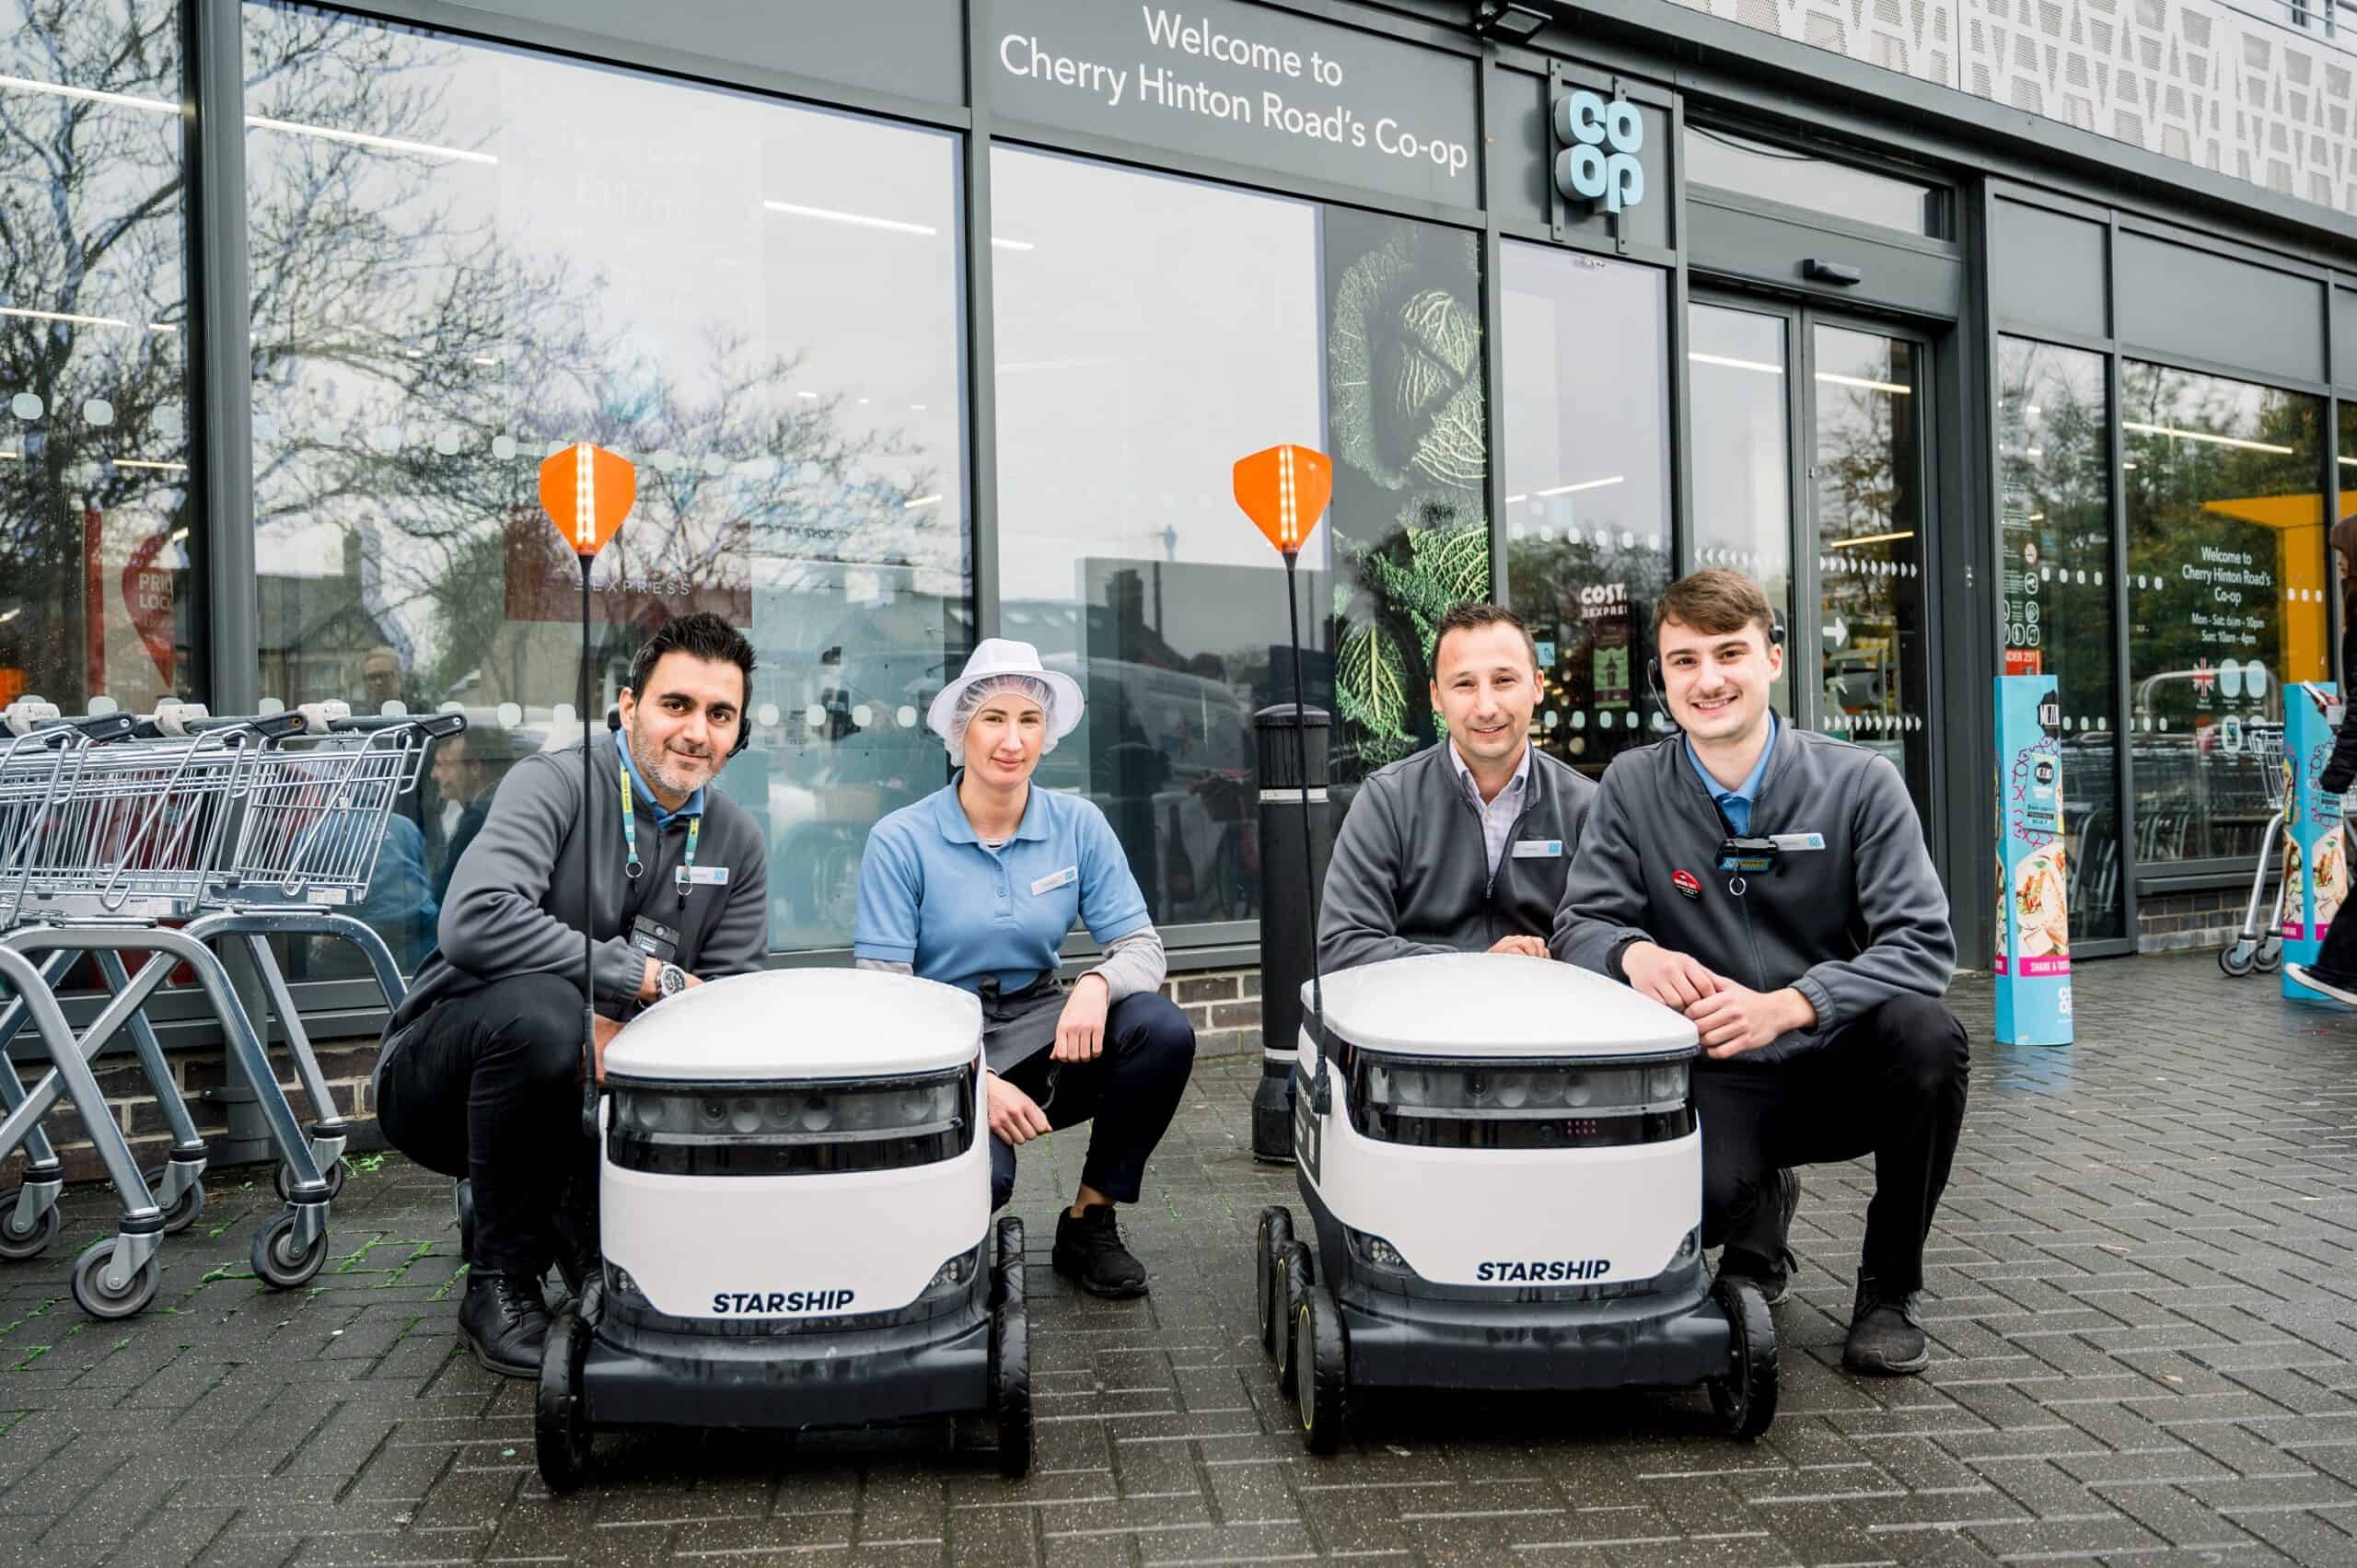 Co-op delivery robots take to the streets of Cambridge as autonomous delivery gains ground